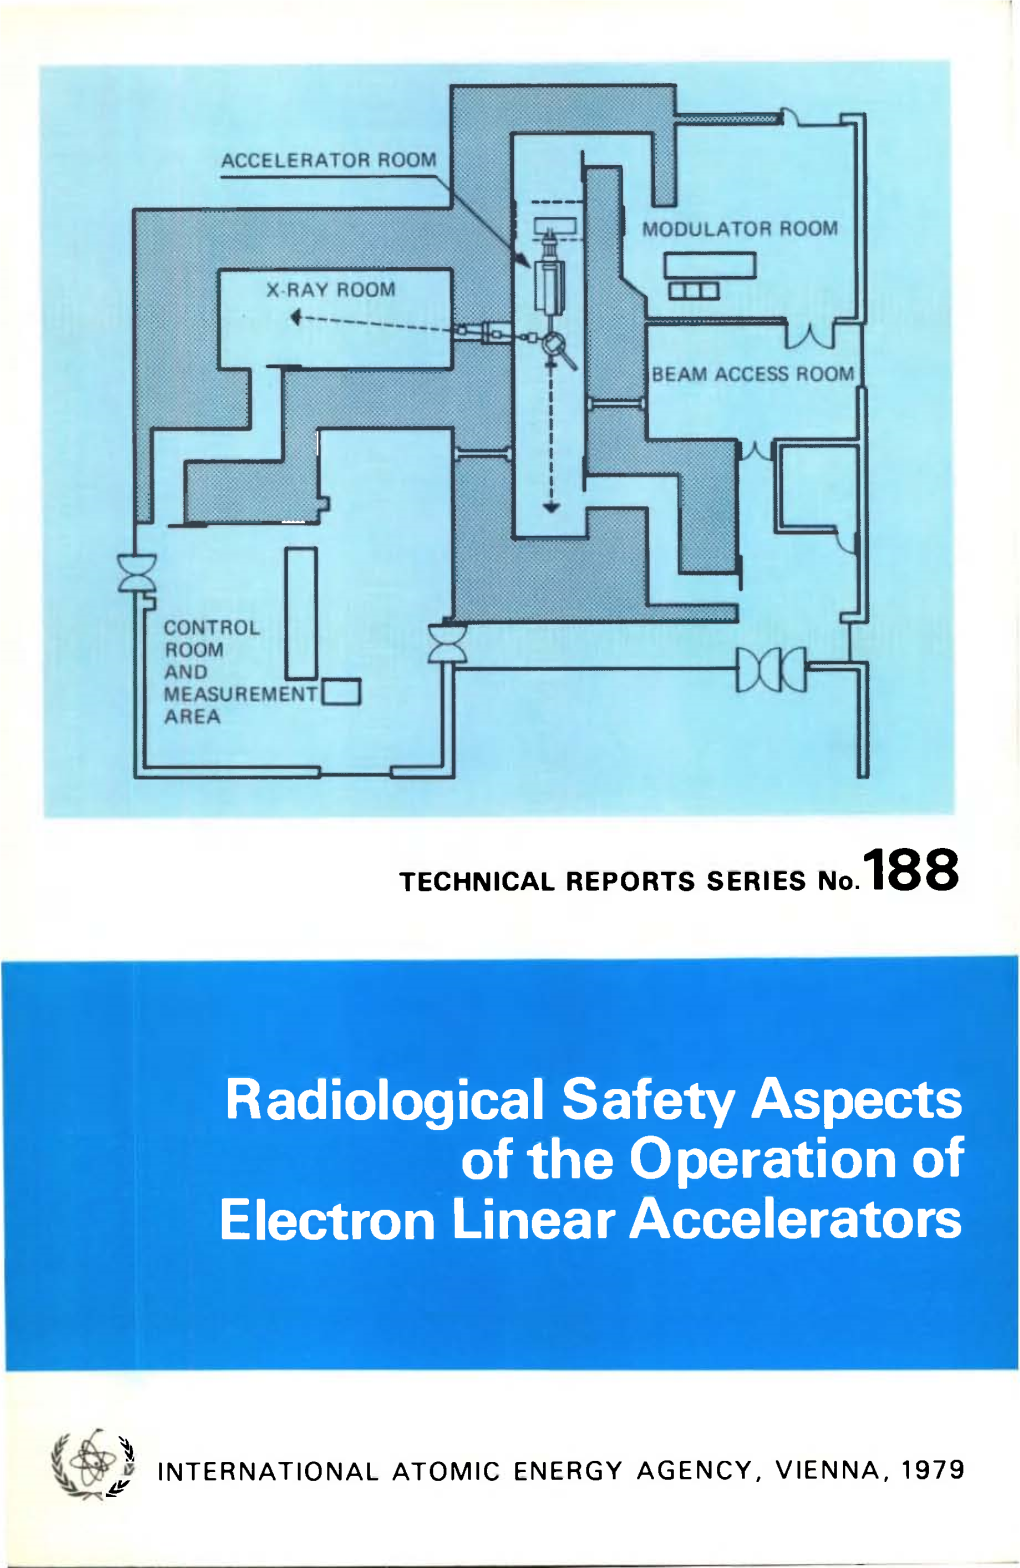 Radiological Safety Aspects of the Operation of Electron Linear Accelerators